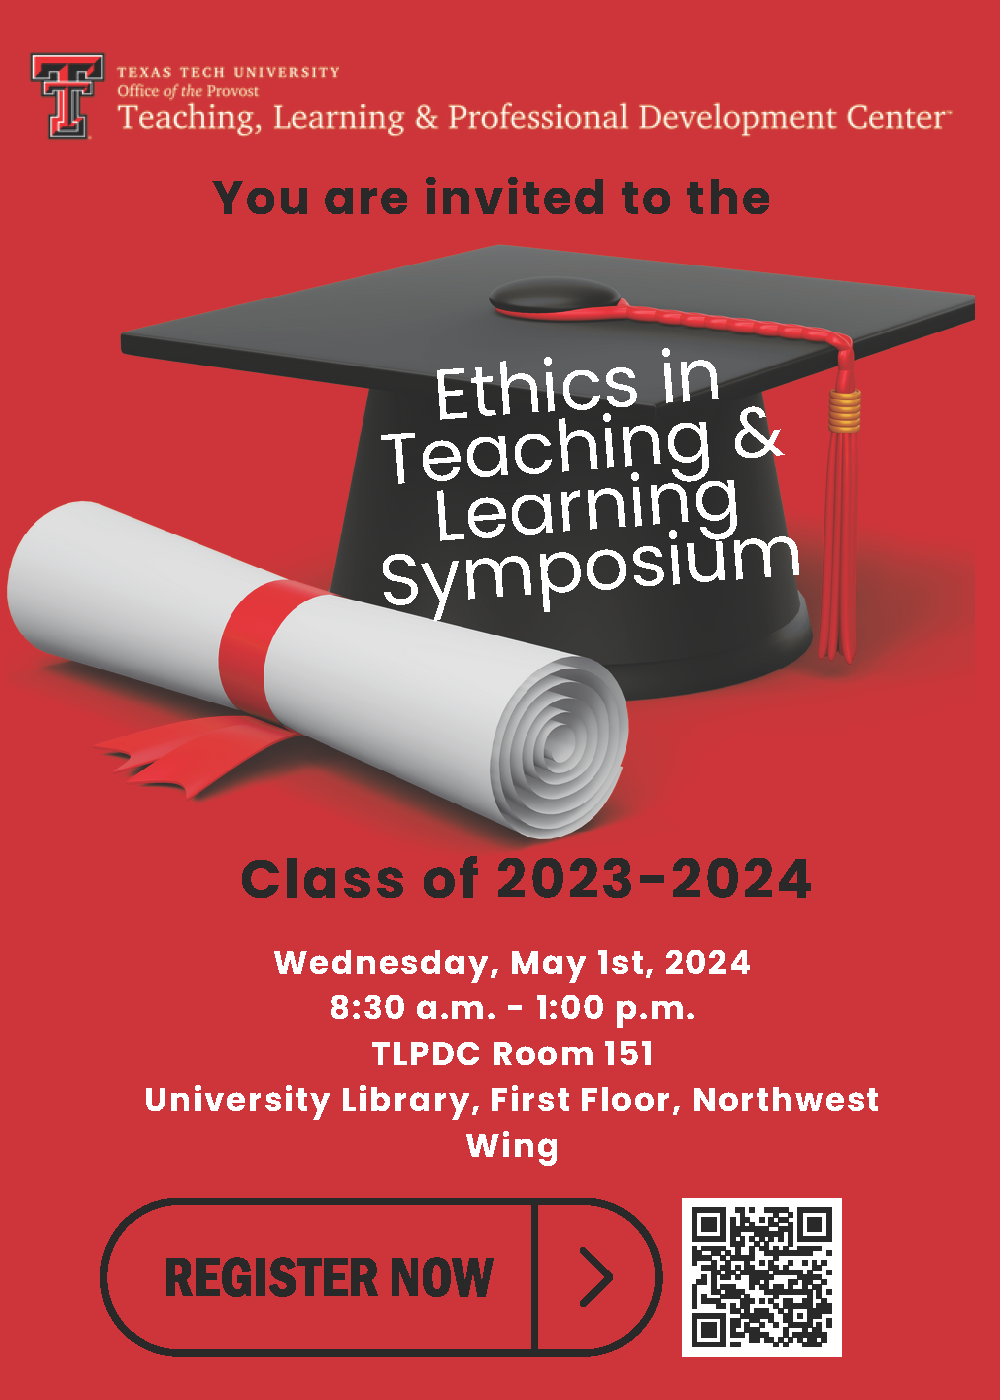 Ethics in Teaching & Learning Symposium Flyer